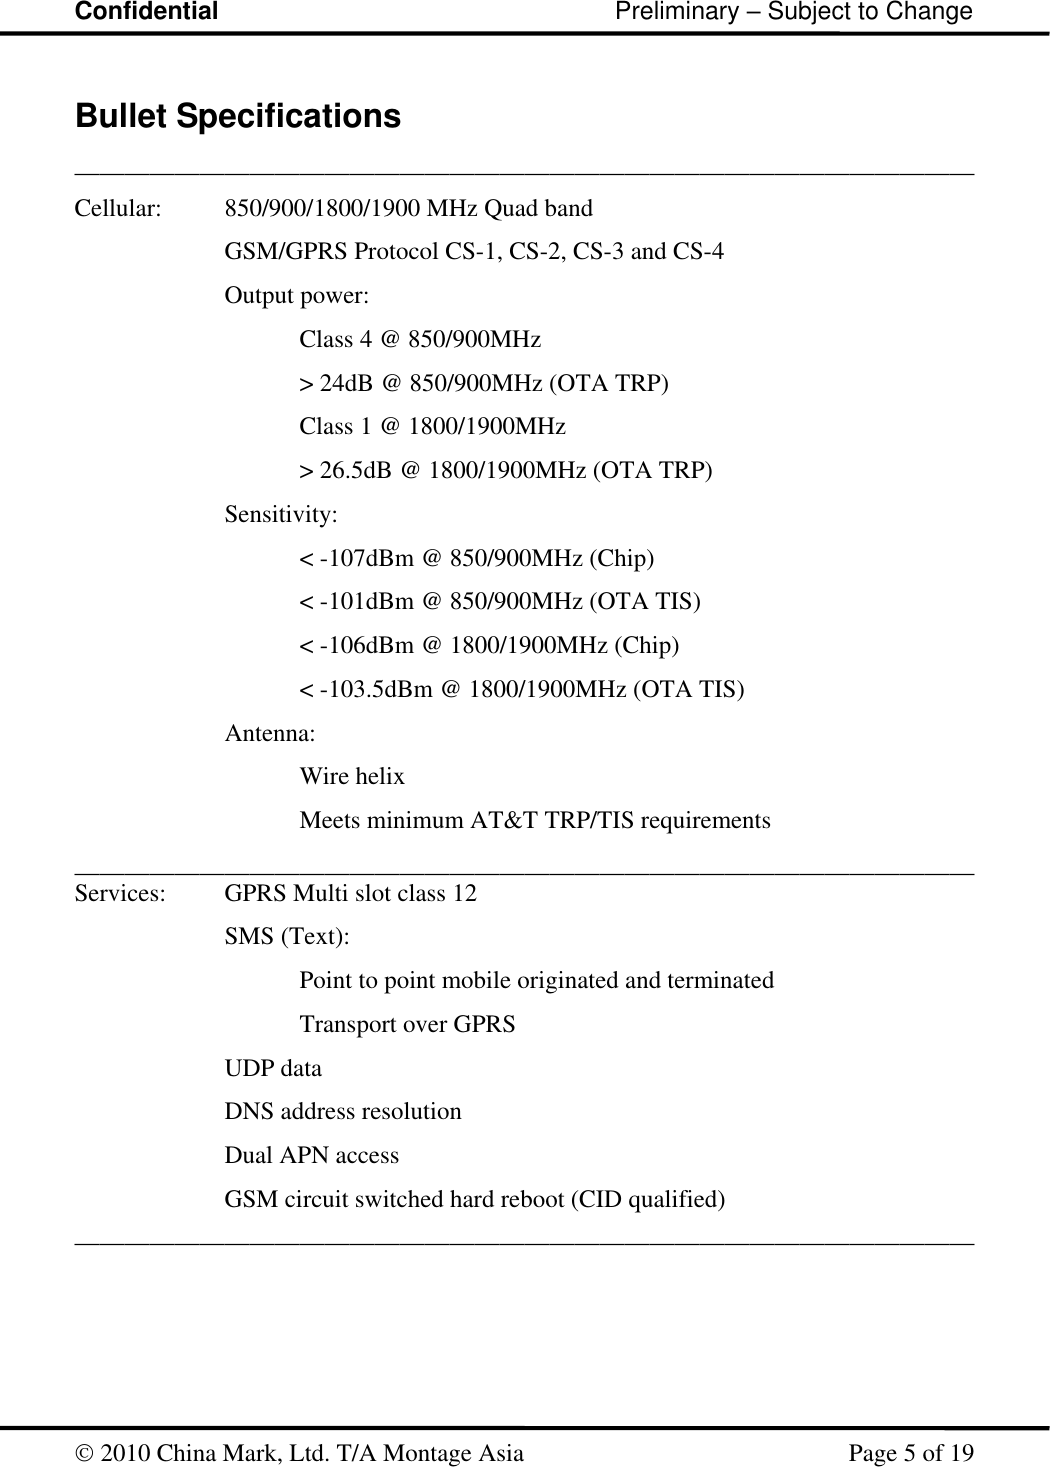 Confidential                                                         Preliminary – Subject to Change   2010 China Mark, Ltd. T/A Montage Asia   Page 5 of 19  Bullet Specifications ________________________________________________________________________ Cellular:  850/900/1800/1900 MHz Quad band GSM/GPRS Protocol CS-1, CS-2, CS-3 and CS-4 Output power:   Class 4 @ 850/900MHz       &gt; 24dB @ 850/900MHz (OTA TRP)   Class 1 @ 1800/1900MHz   &gt; 26.5dB @ 1800/1900MHz (OTA TRP) Sensitivity:  &lt; -107dBm @ 850/900MHz (Chip)  &lt; -101dBm @ 850/900MHz (OTA TIS) &lt; -106dBm @ 1800/1900MHz (Chip) &lt; -103.5dBm @ 1800/1900MHz (OTA TIS)     Antenna:        Wire helix       Meets minimum AT&amp;T TRP/TIS requirements ________________________________________________________________________Services:  GPRS Multi slot class 12 SMS (Text):  Point to point mobile originated and terminated Transport over GPRS     UDP data     DNS address resolution     Dual APN access GSM circuit switched hard reboot (CID qualified) ________________________________________________________________________ 